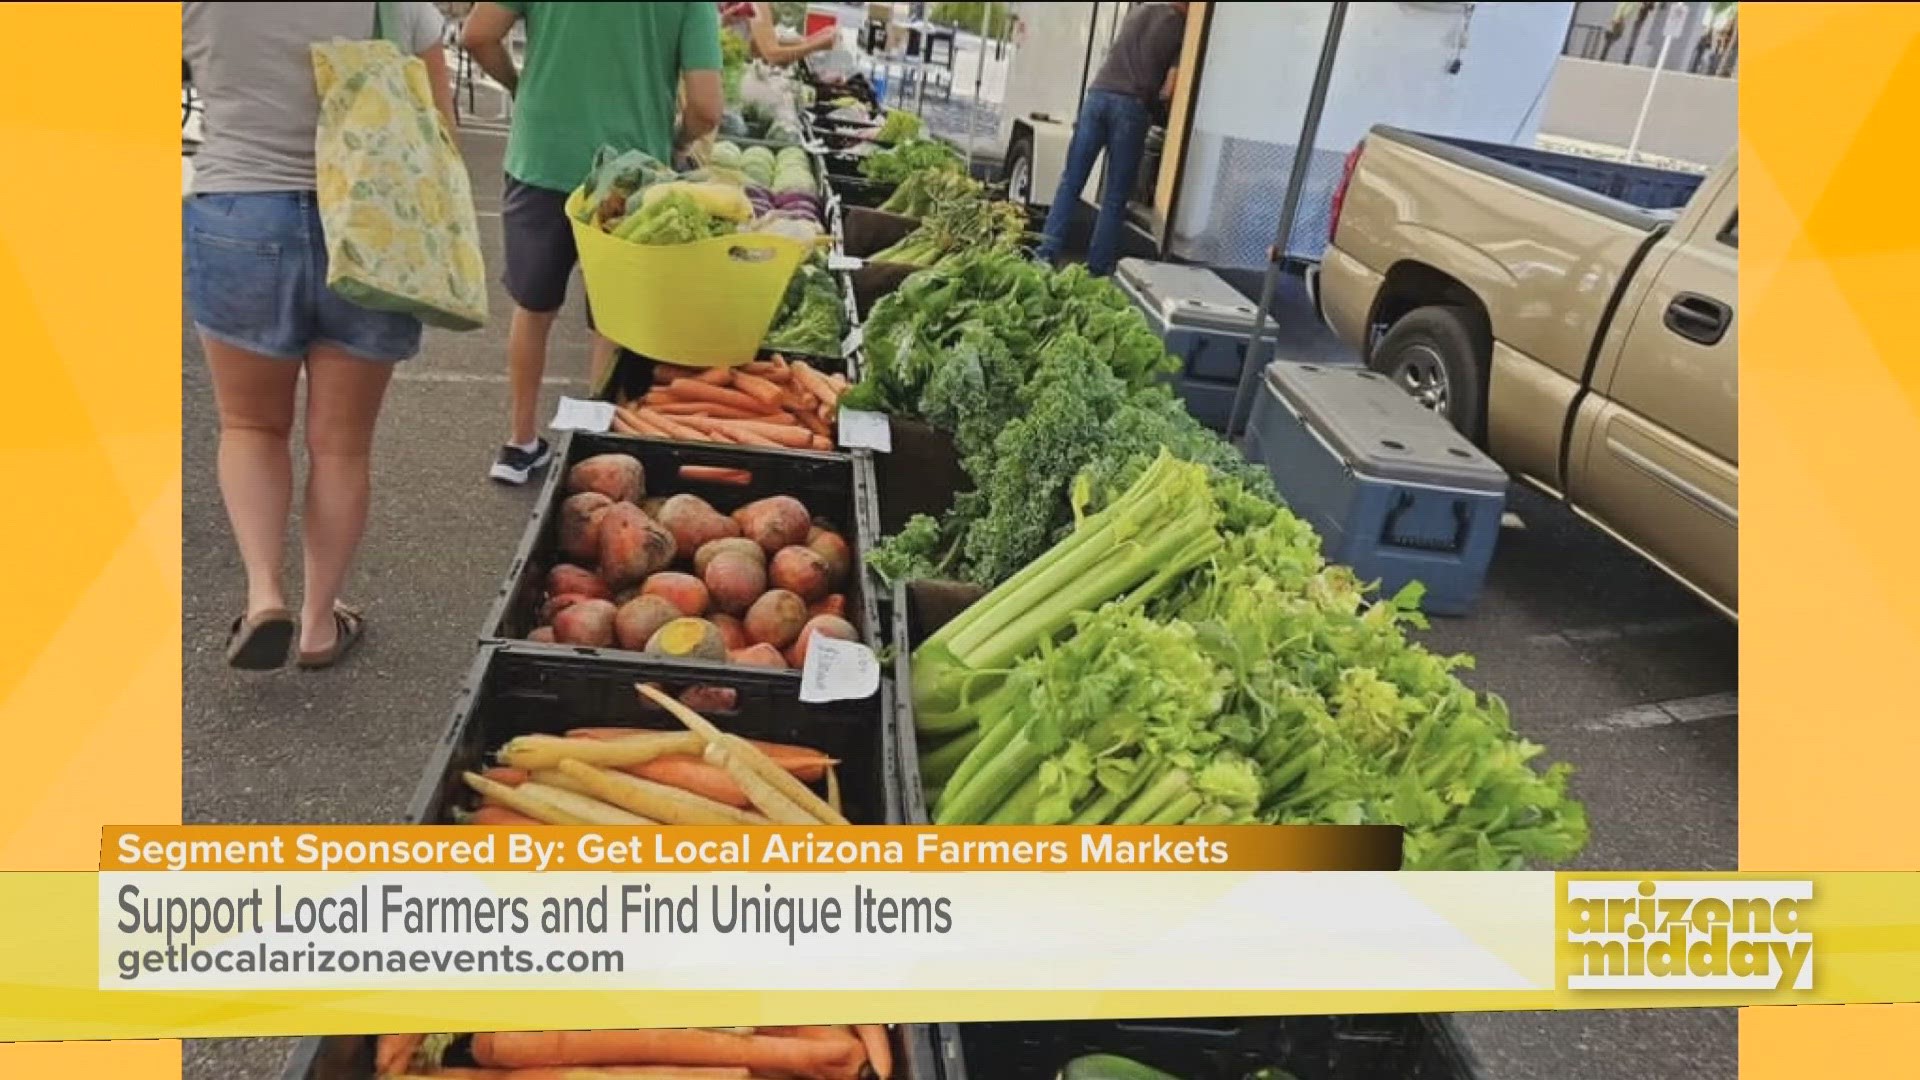 Christa Esquibel gives us the lowdown on the Get Local Arizona Farmers Markets. Find out how you can support farmers and make unique finds.